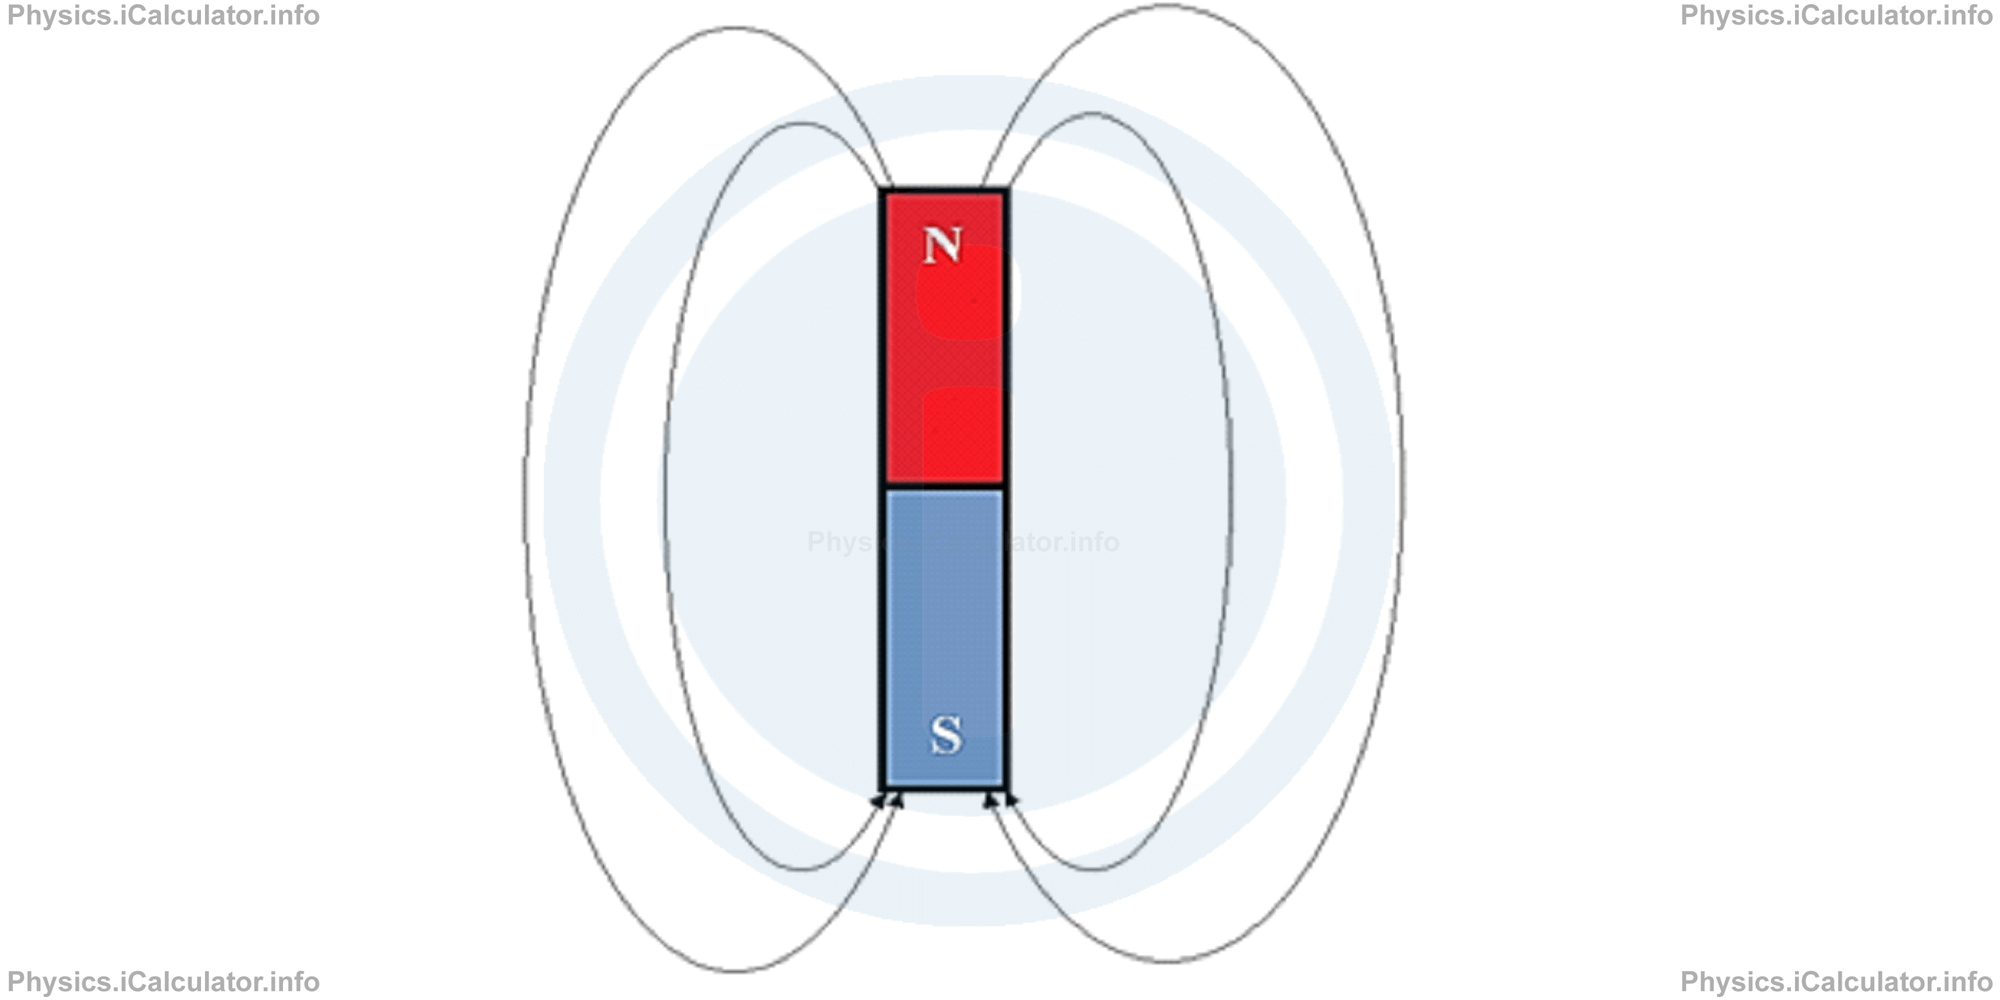 Physics Tutorials: This image provides visual information for the physics tutorial Introduction to Magnetism 